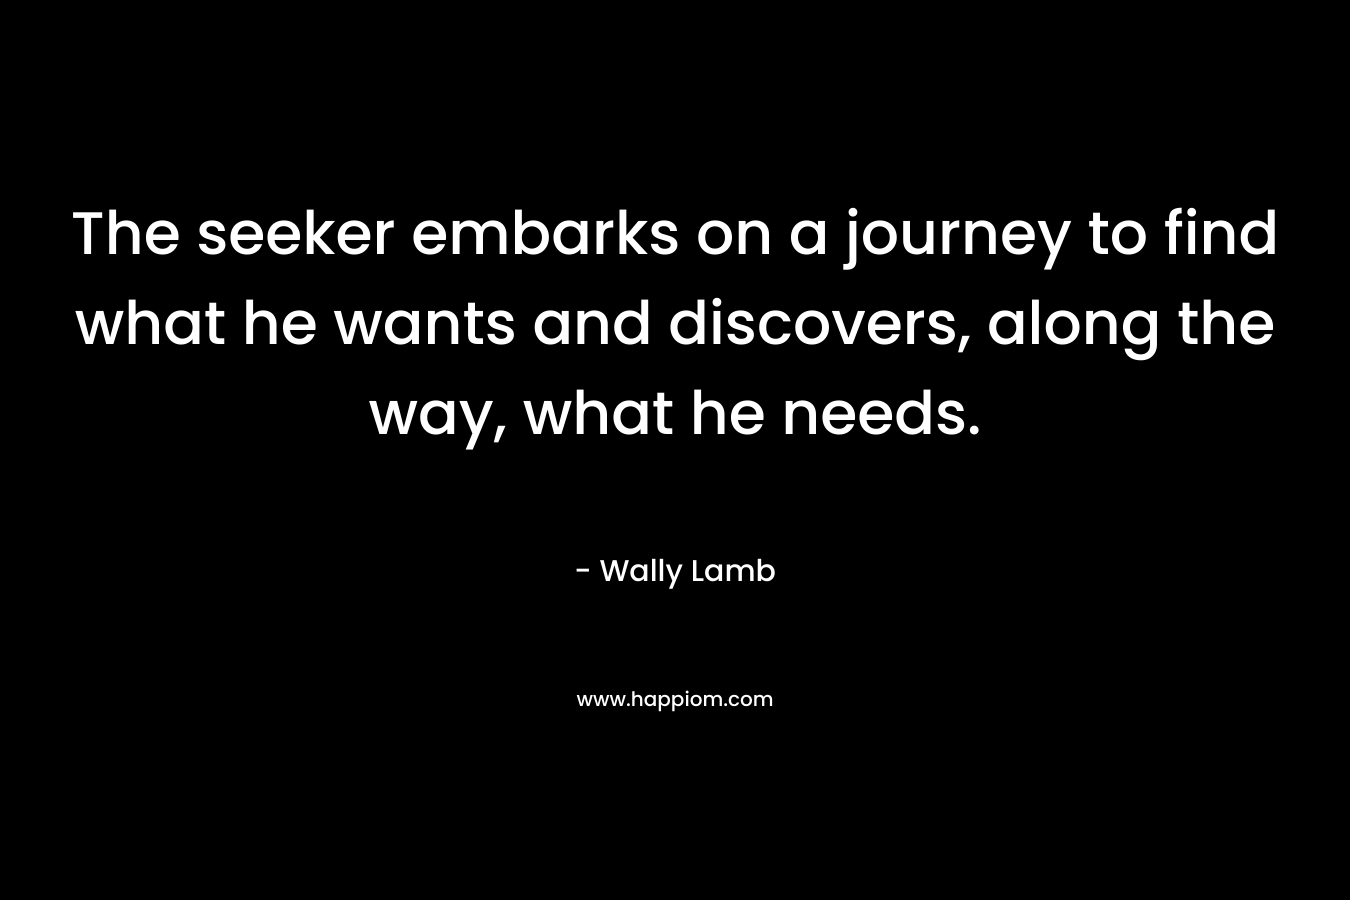 The seeker embarks on a journey to find what he wants and discovers, along the way, what he needs. – Wally Lamb